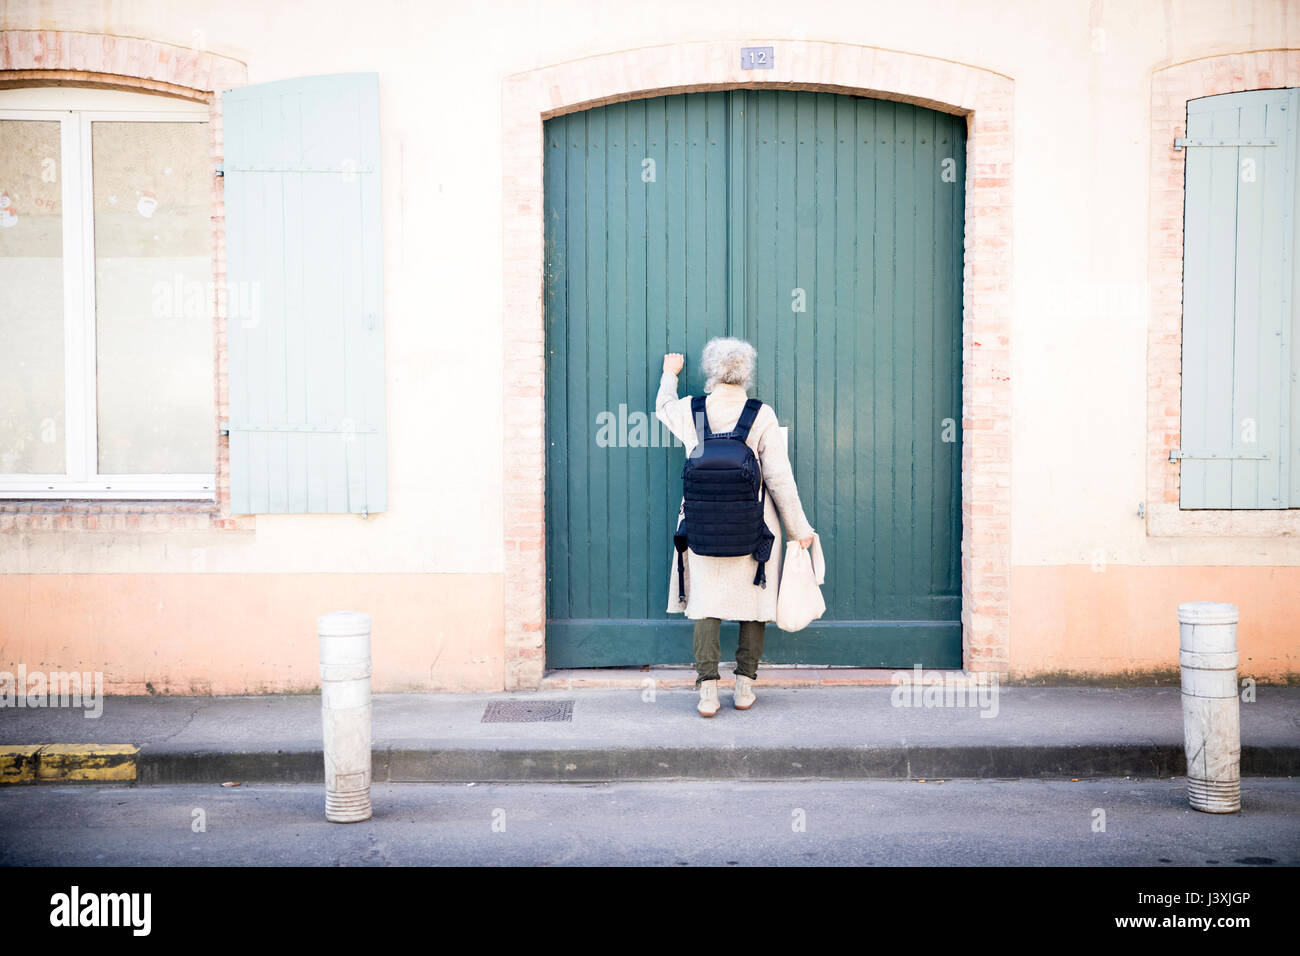 Rear view of woman knocking on door, Bruniquel, France Stock Photo